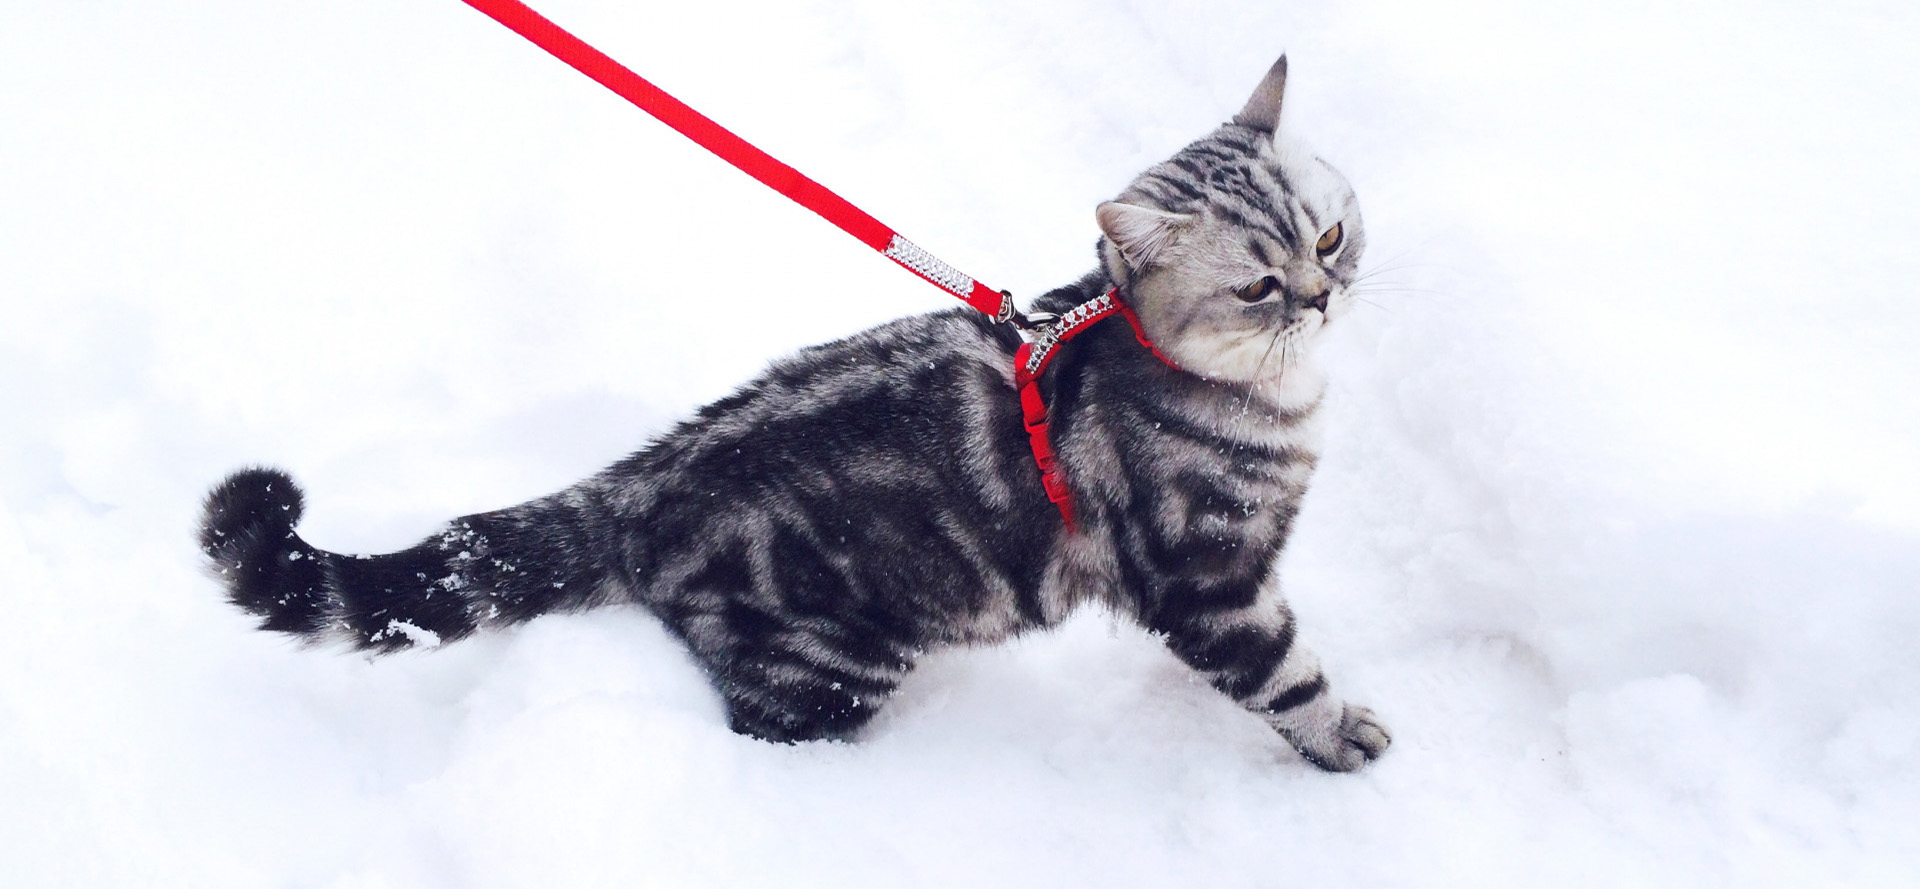 Cat in red harness.